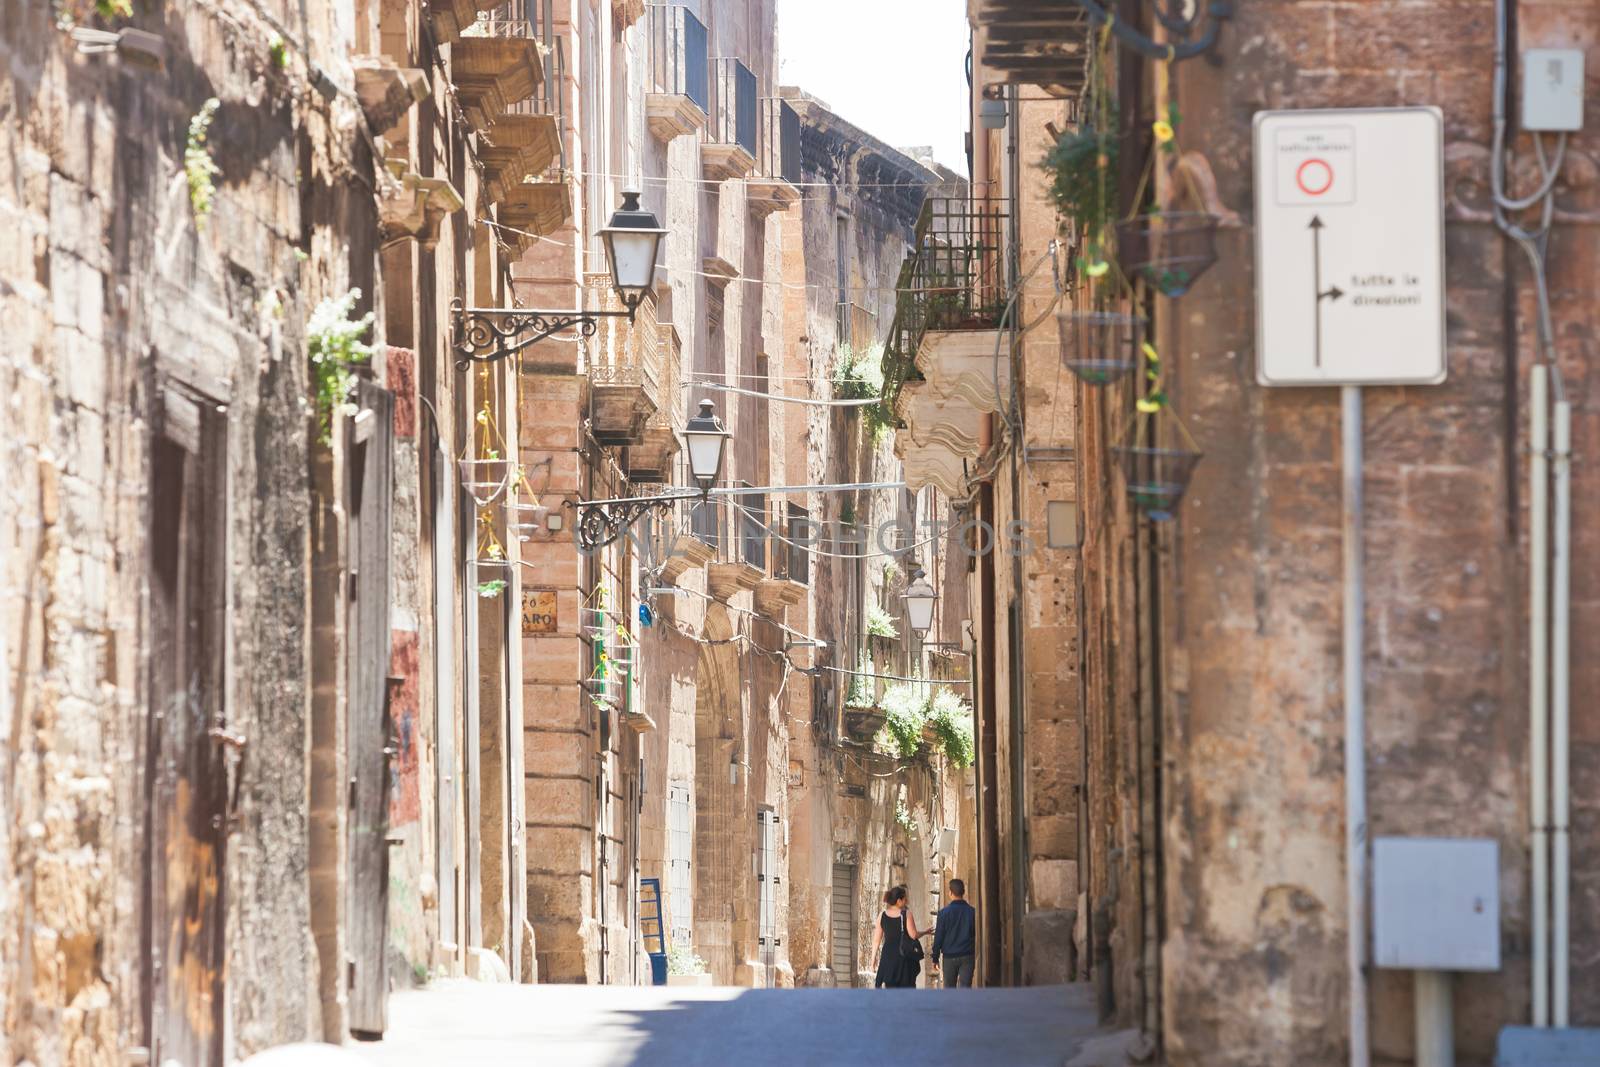 Taranto, Apulia, Italy - Middle aged architecture in the old town of Taranto